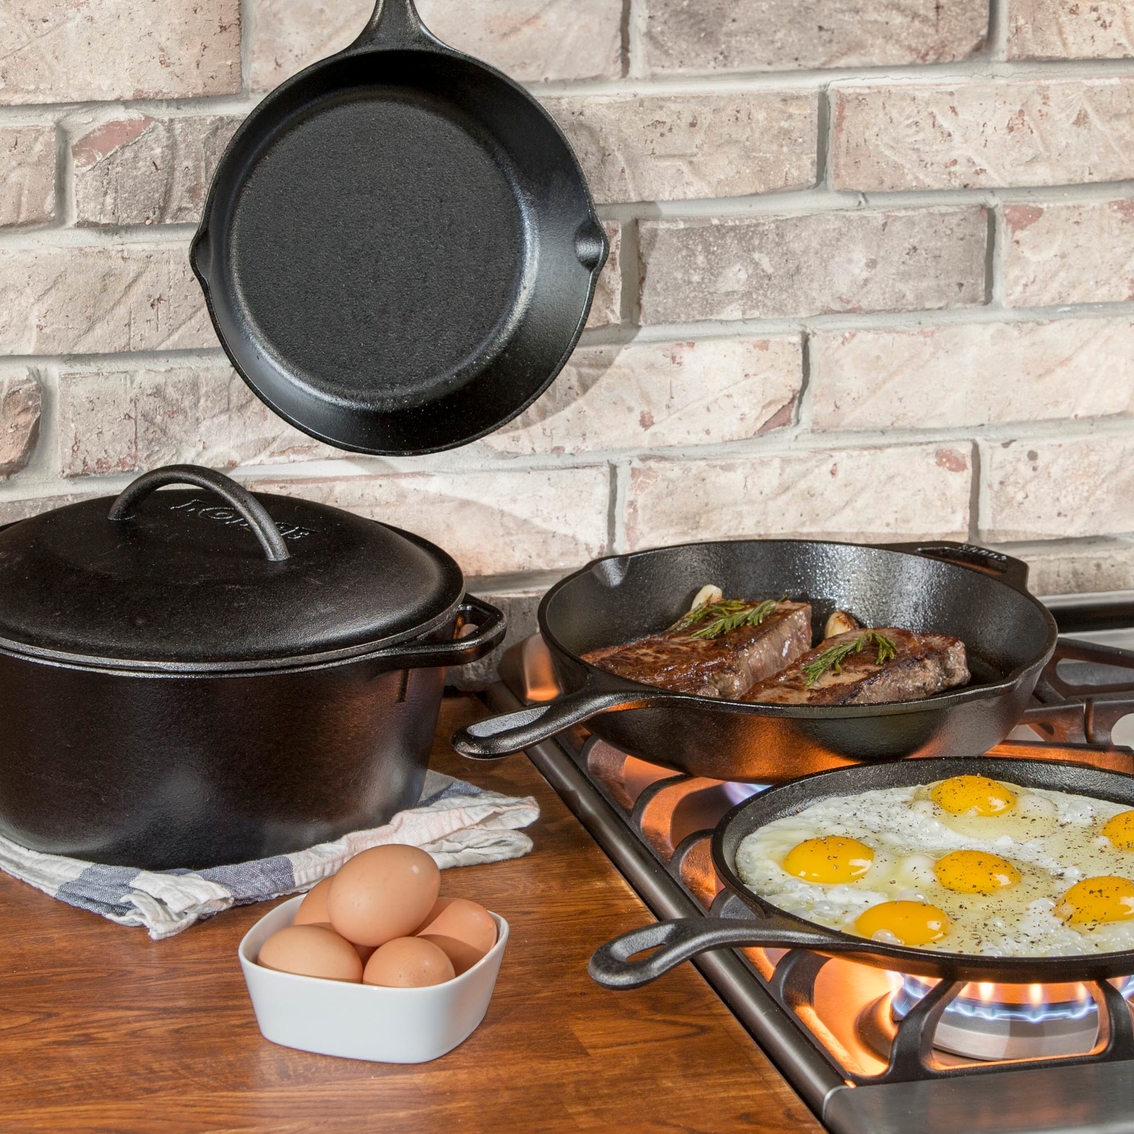 Lodge Cast Iron 5 pc. Cookware Set - Image 2 of 2